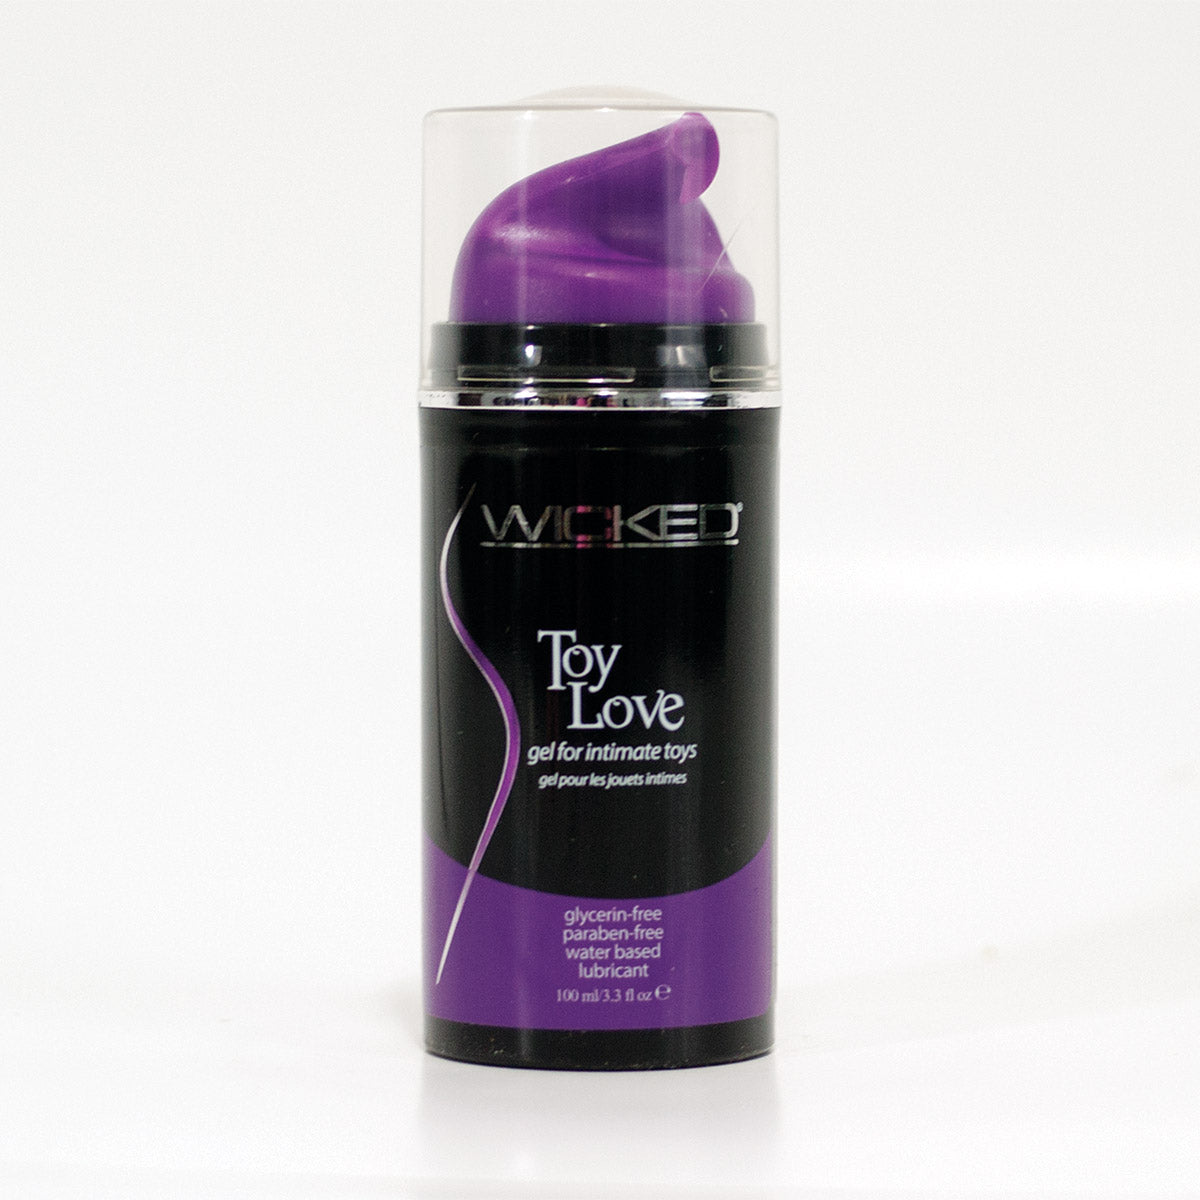 Wicked Sensual Care Toy Love Lubricant 3.3oz